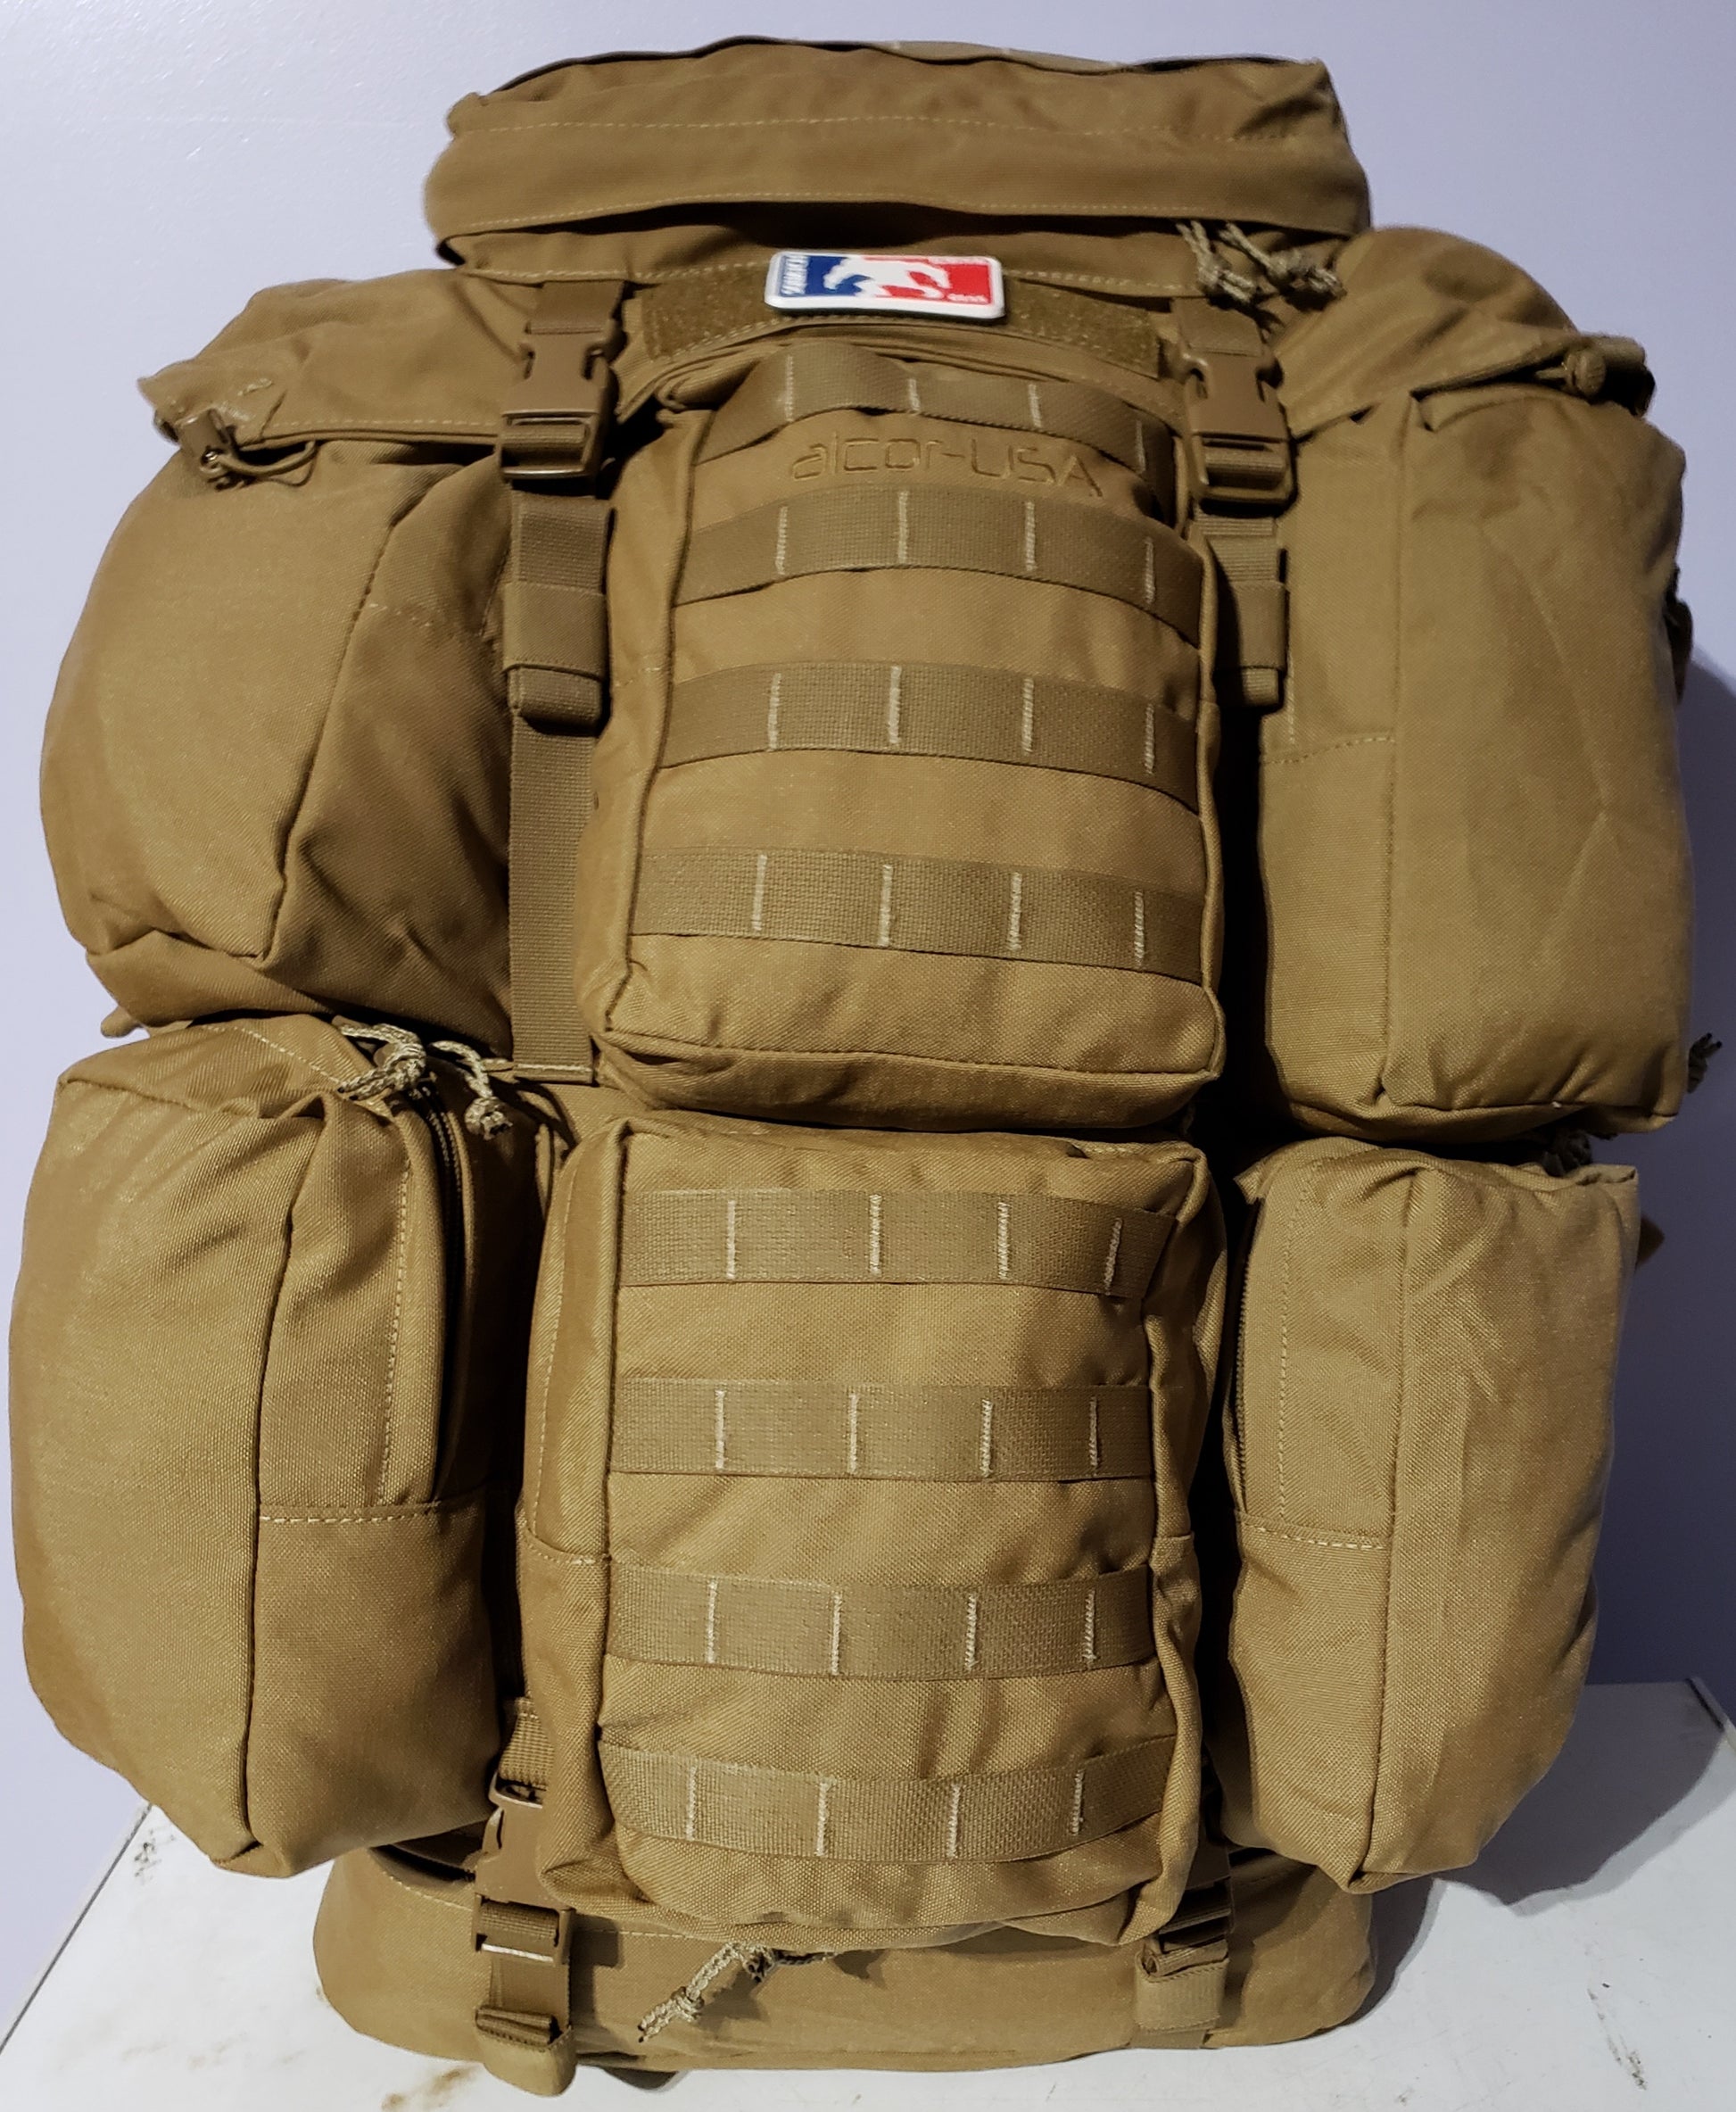 Coyote ruck - sasquatch - bigfoot -BACK PACK - ruck sack - backpack - rucksack - ruck - military style - tactical pack - black tactical - usa made gear - us - civilian pack - overland - outdoor - contingency - resiliency - self reliance - camping - hunting - off grid - survial pack - emergency pack - travel pack - internal frame 